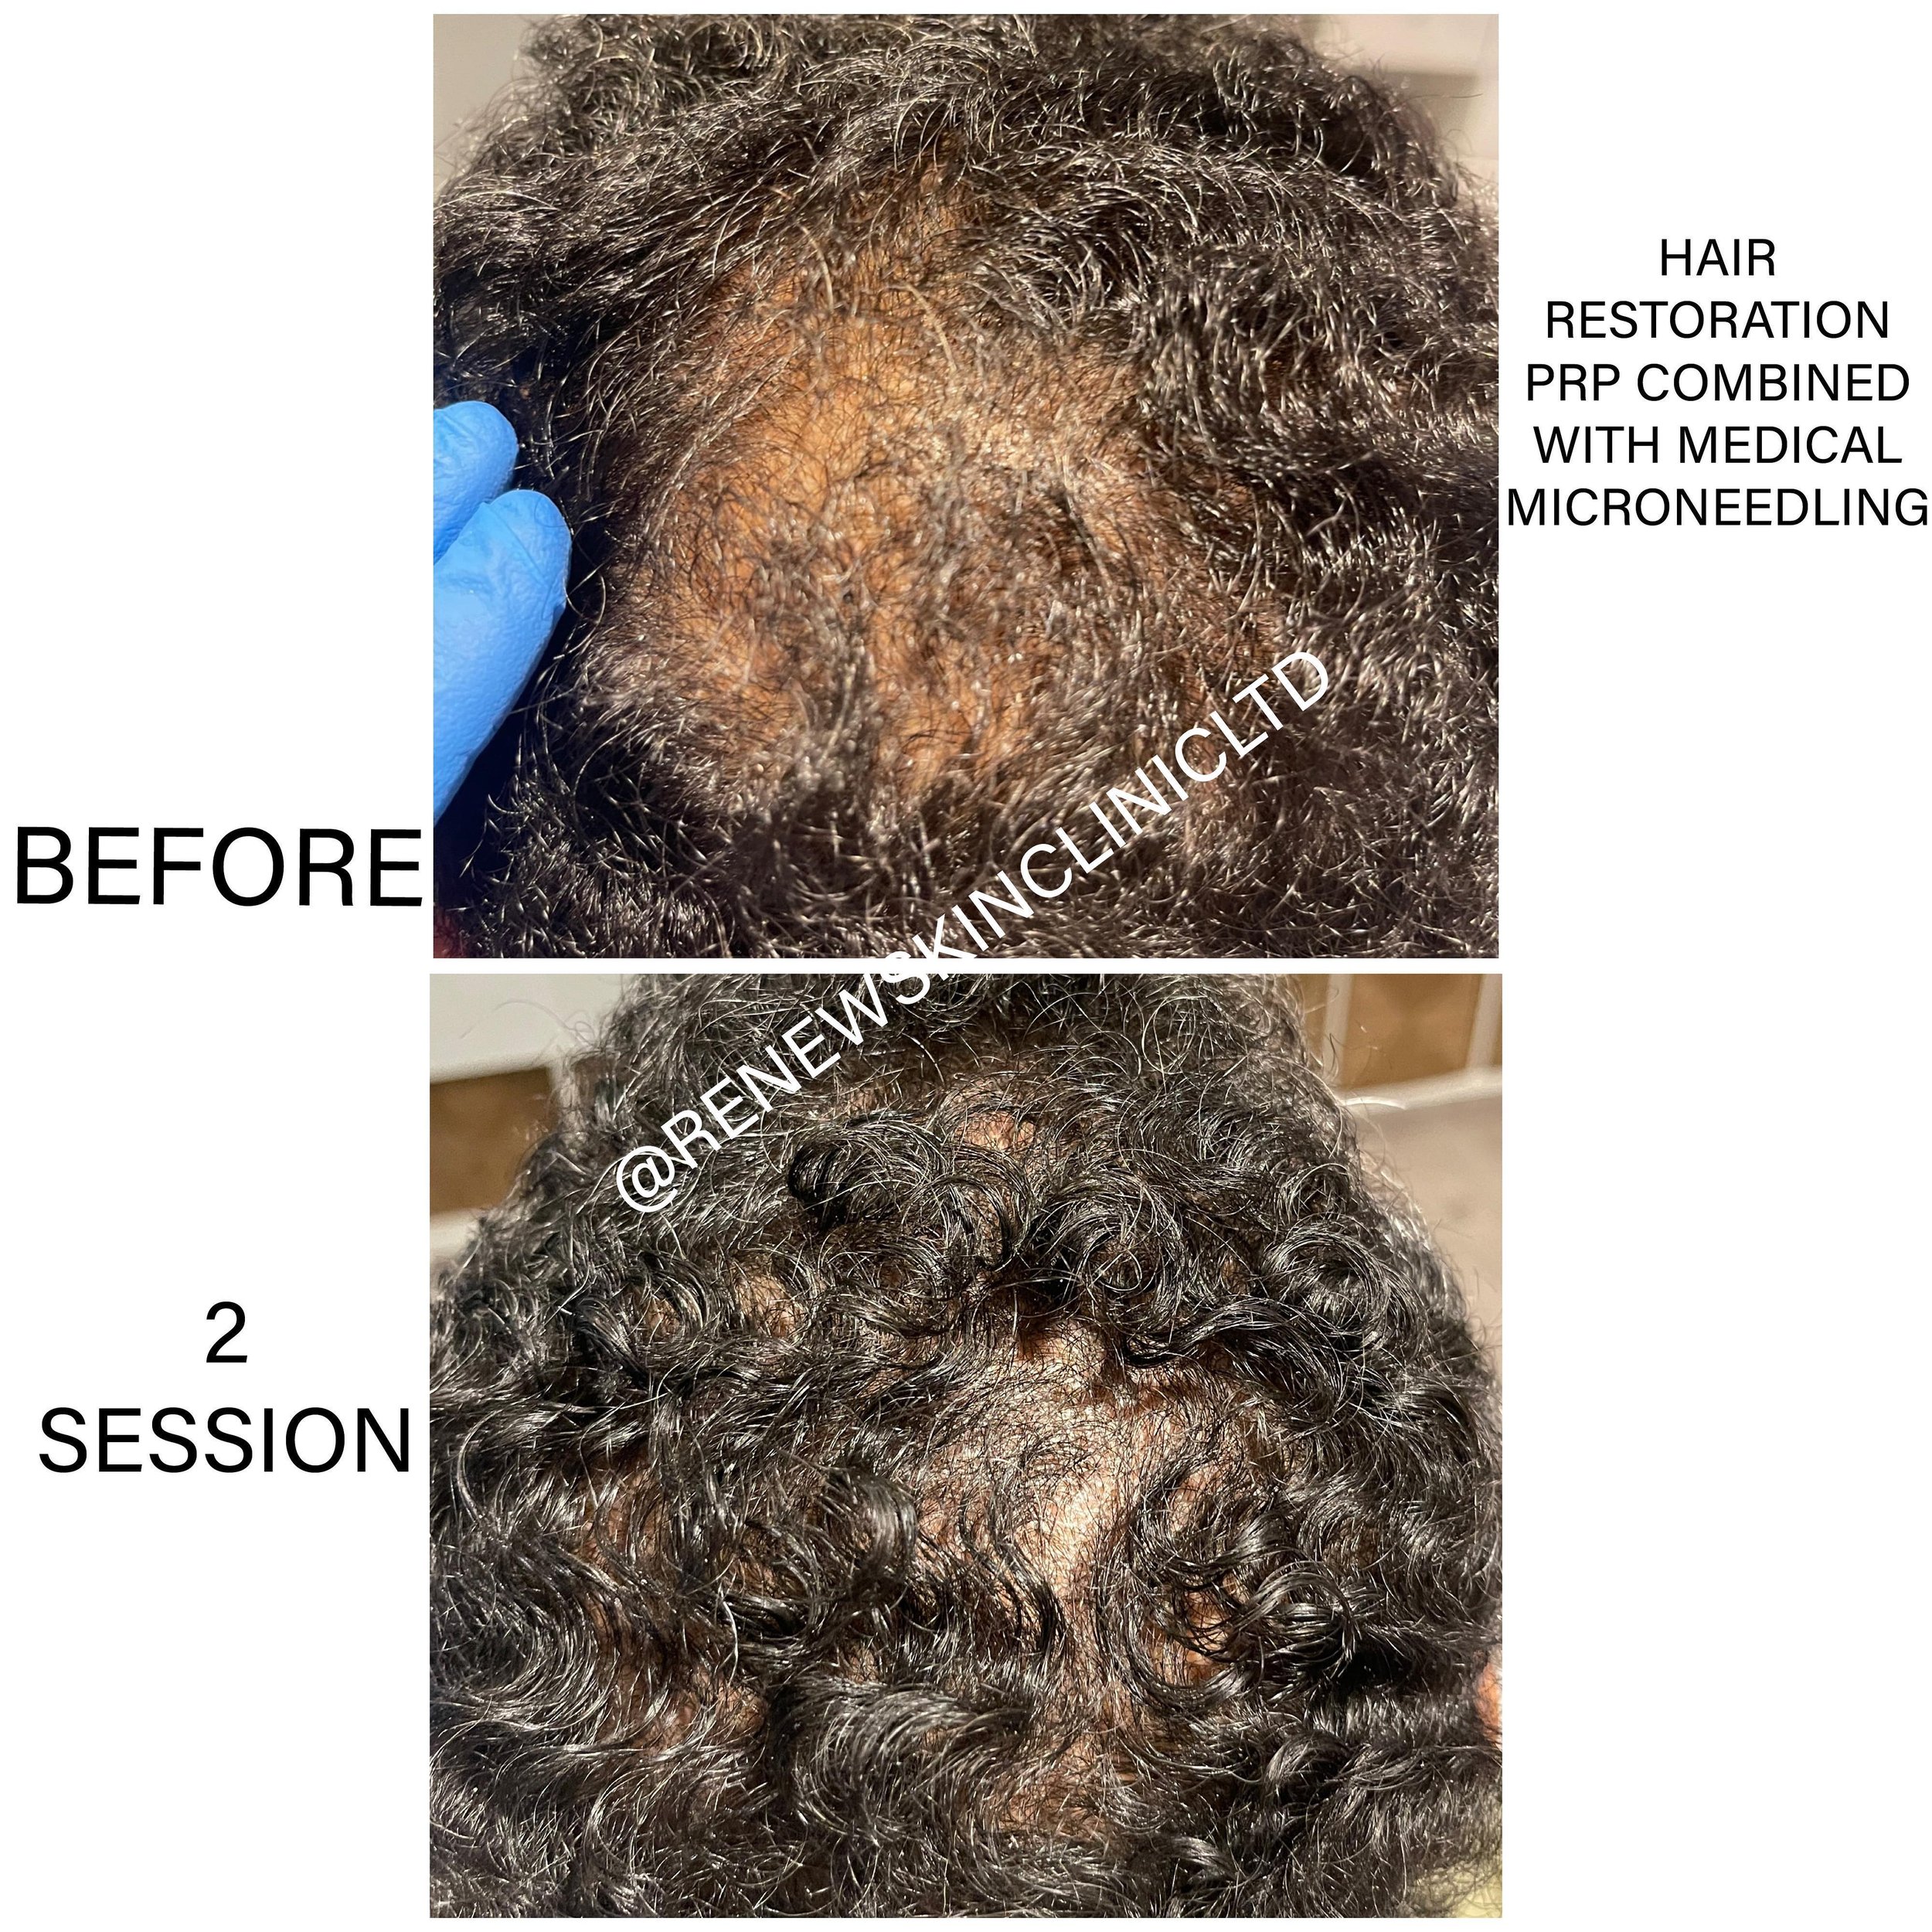 HAIR RESTORATION WITH PRP COMBINED WITH MEDICAL MICRO NEEDING!🩸
.
. 
⭐️⭐️ONLY 2 SESSION SO FAR! LOOK AT THAT GROWTH!  HAD THE THIRD ONE TODAY ❤️
.
.
👉PLEASE NOTE - results varies between clients and how much sessions is needed to see desire results